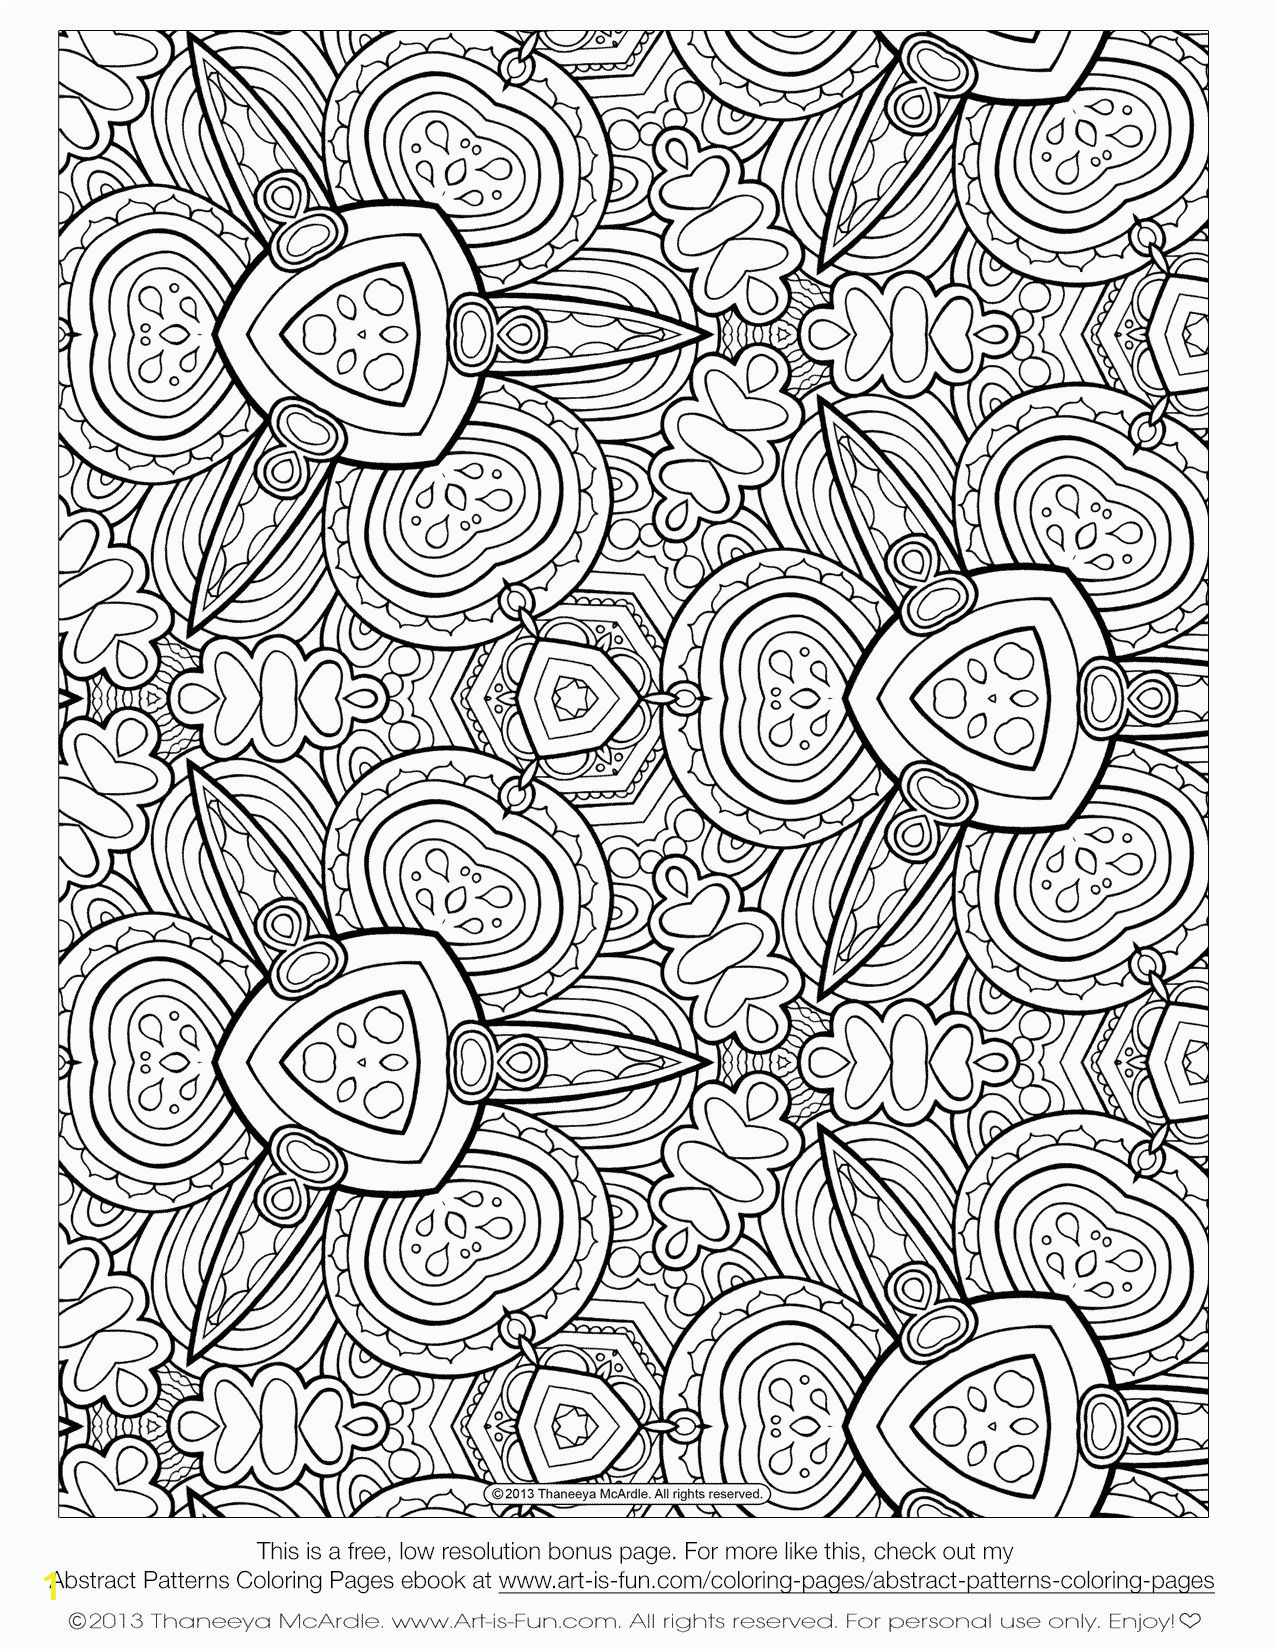 Free Printable Adult Coloring Pages for Fall Free Printable Adult Coloring Pages Paysage Cute Printable